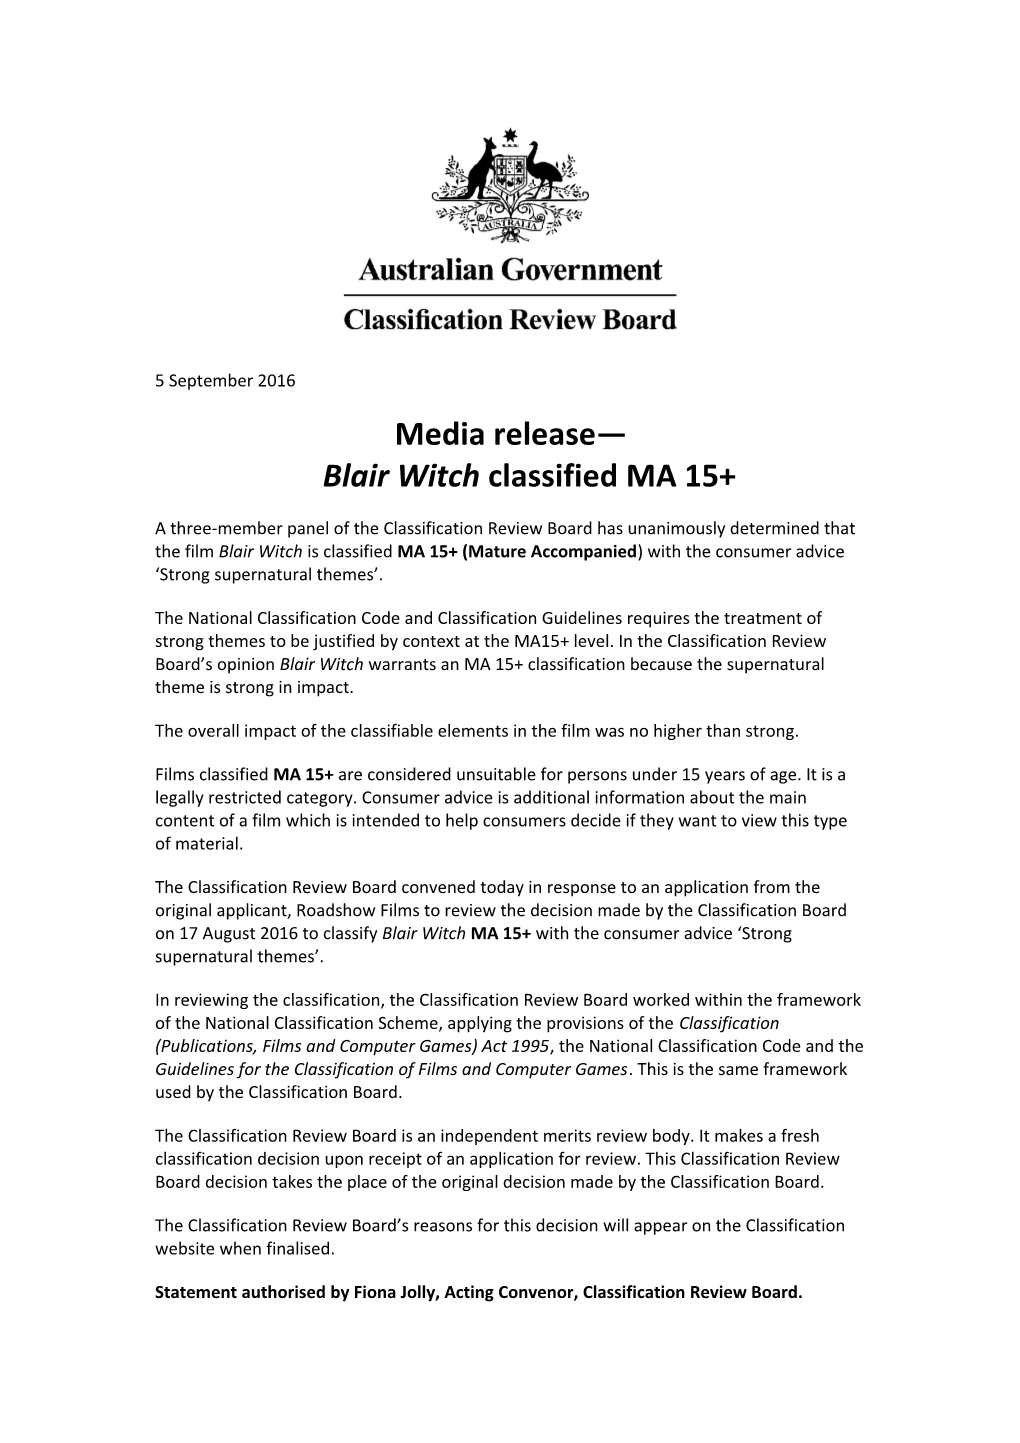 30 August 2016 Media Release Blair Witch Classified MA 15+